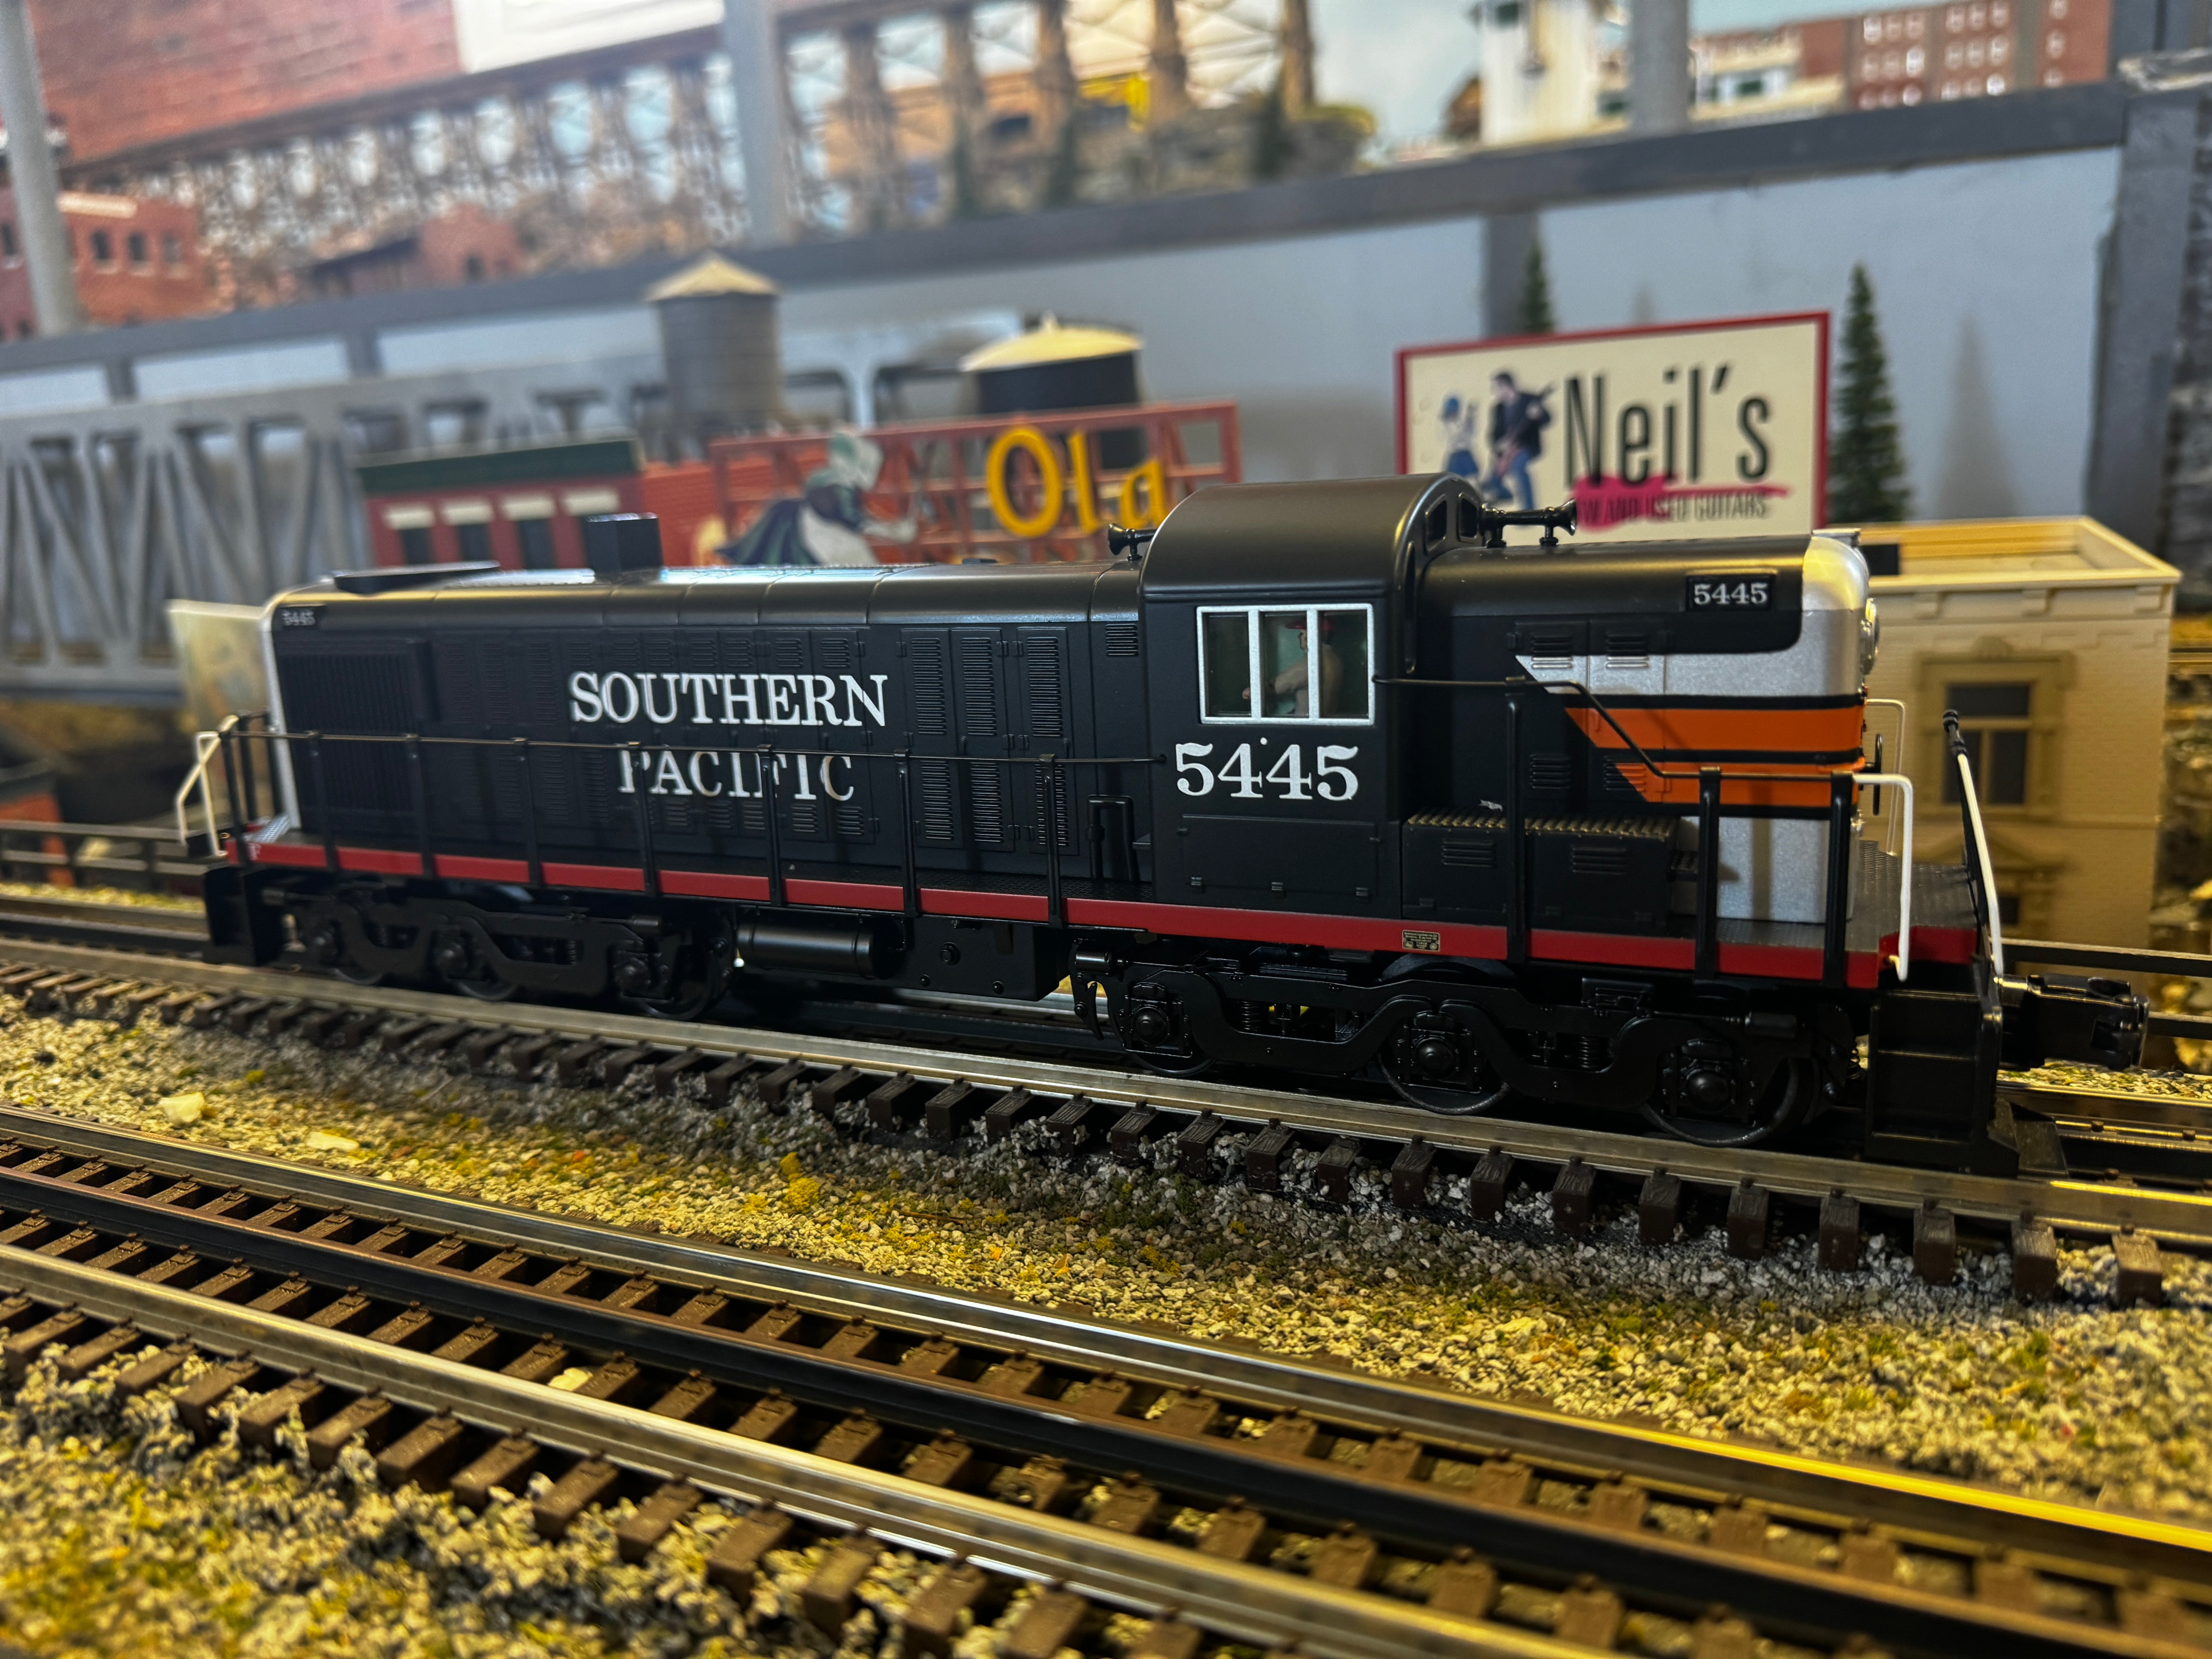 MTH 30-21172-1 - RSD-5 Diesel Engine "Southern Pacific" #5445 w/ PS3